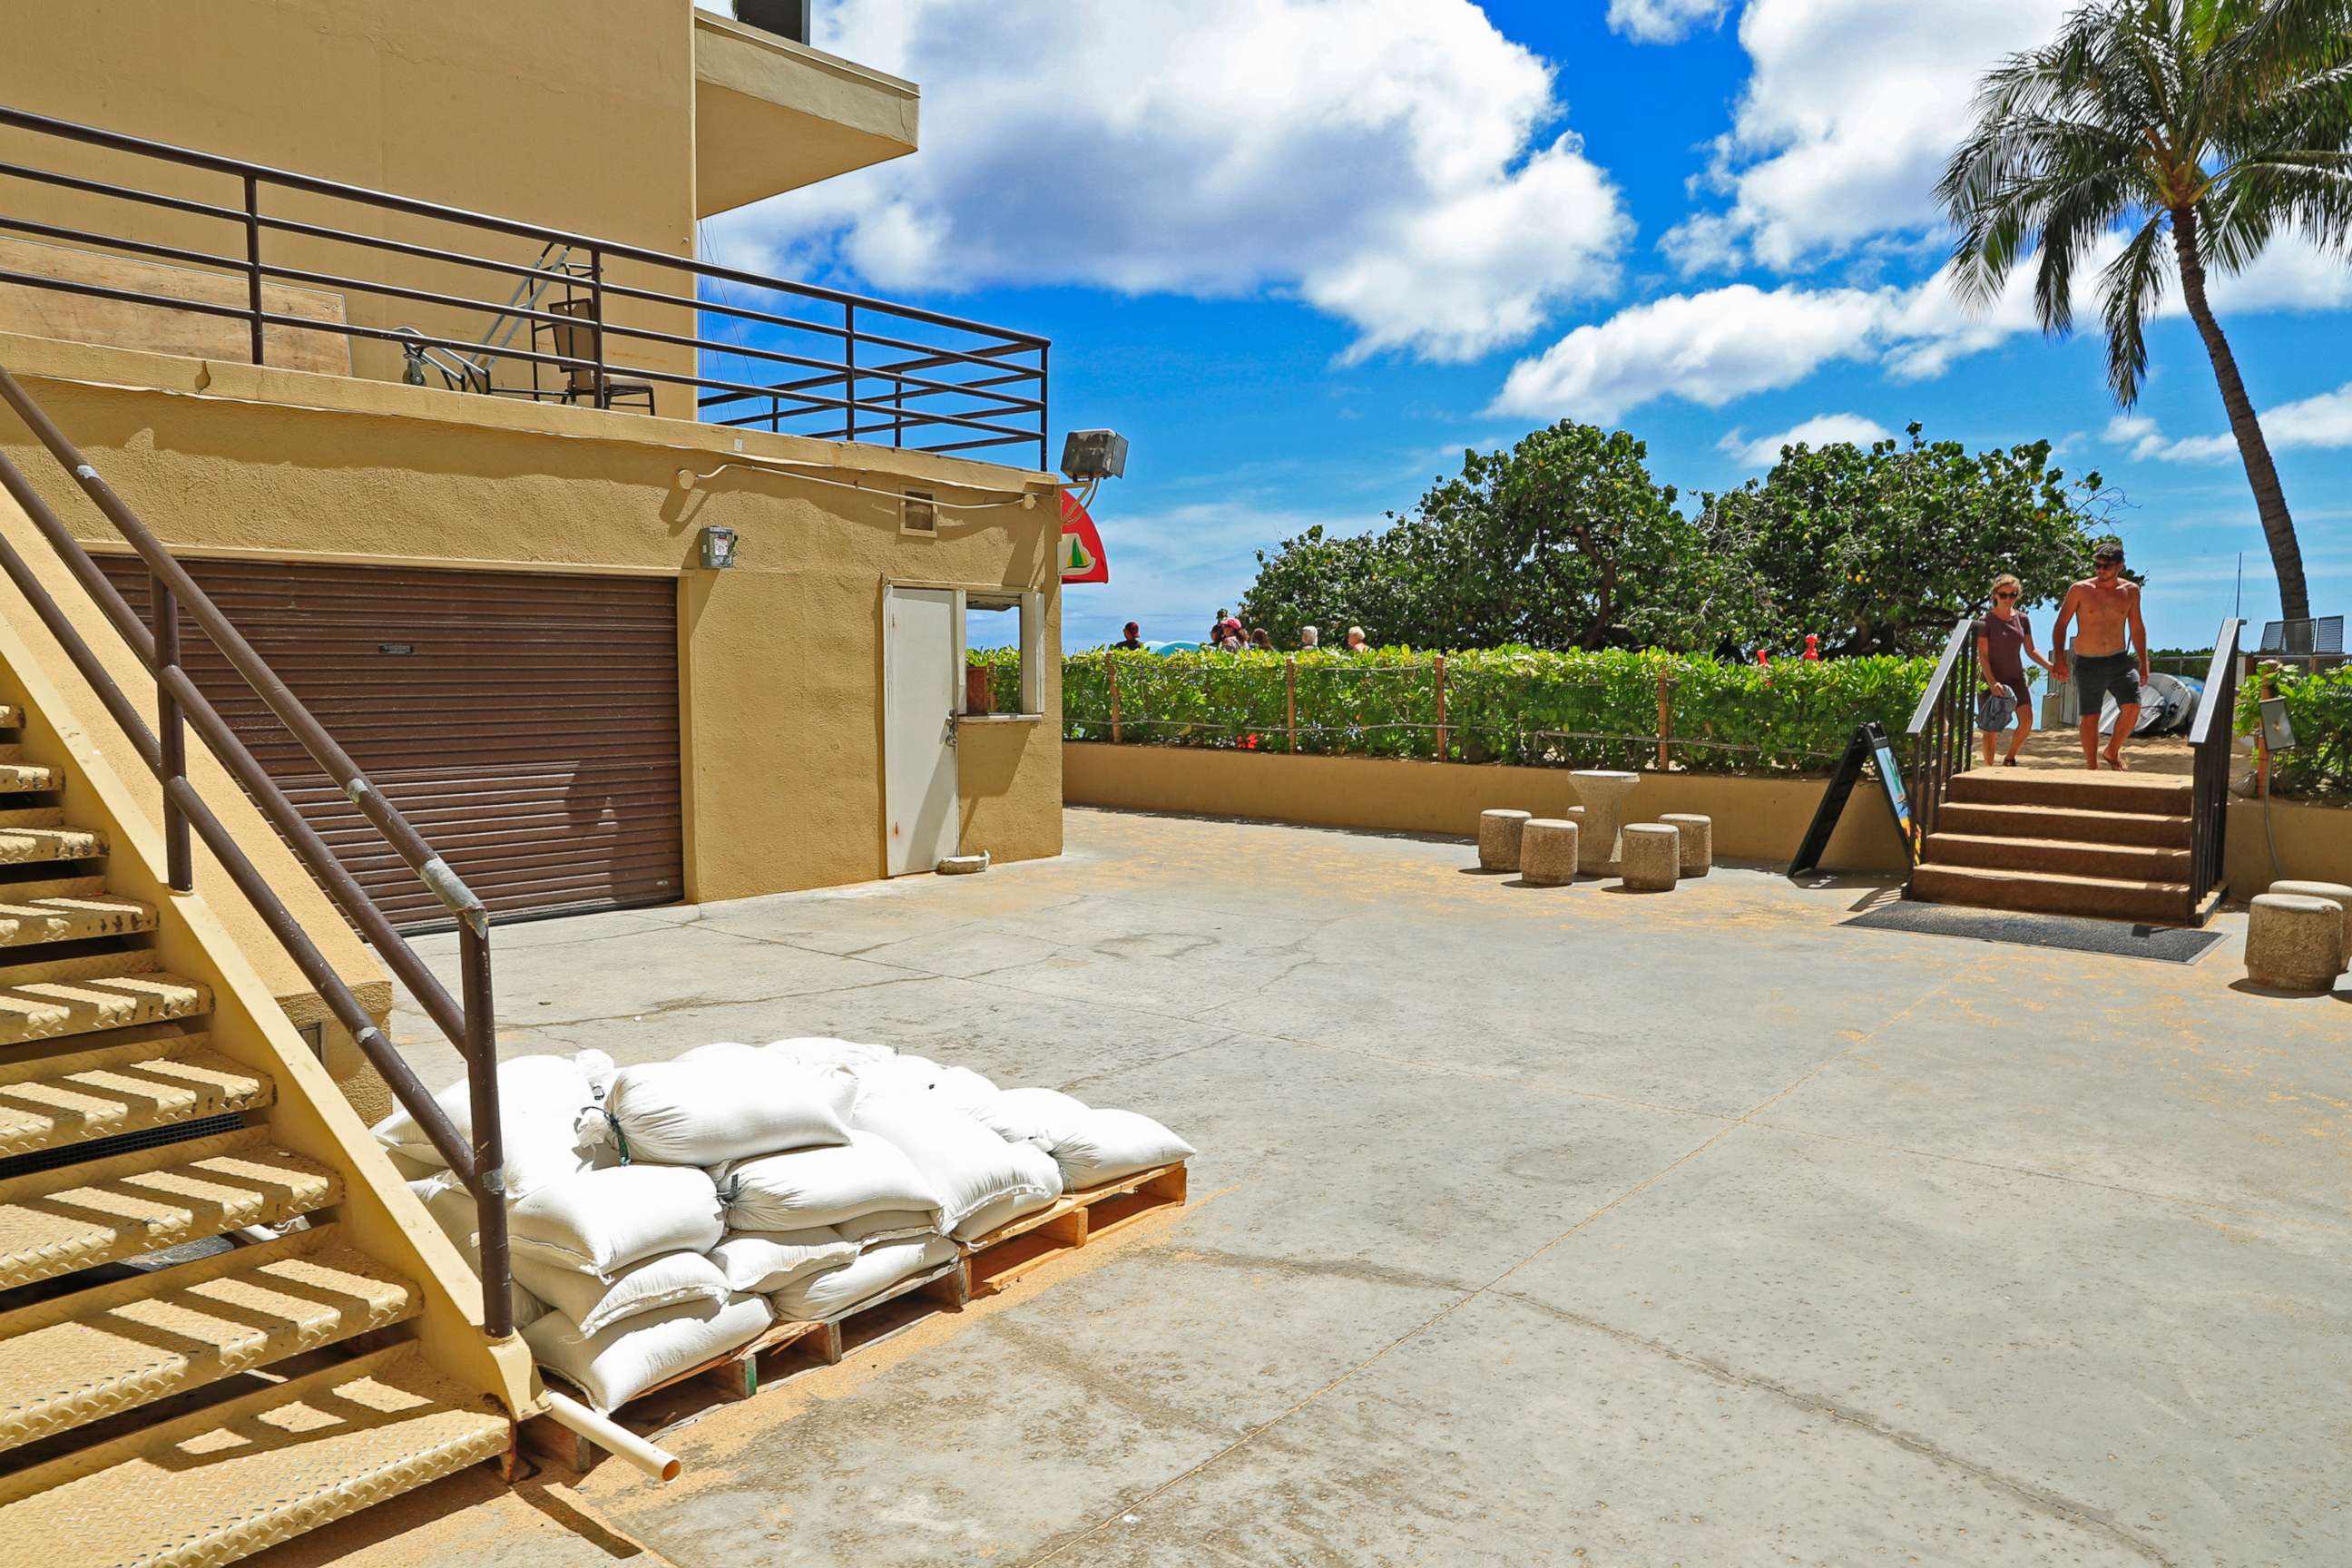 PHOTO: In this Monday, Aug. 20, 2018 photo, sandbags are seen near a stairway at the west end of the Sheraton Waikiki hotel in Honolulu in preparation for Hurricane Lane.